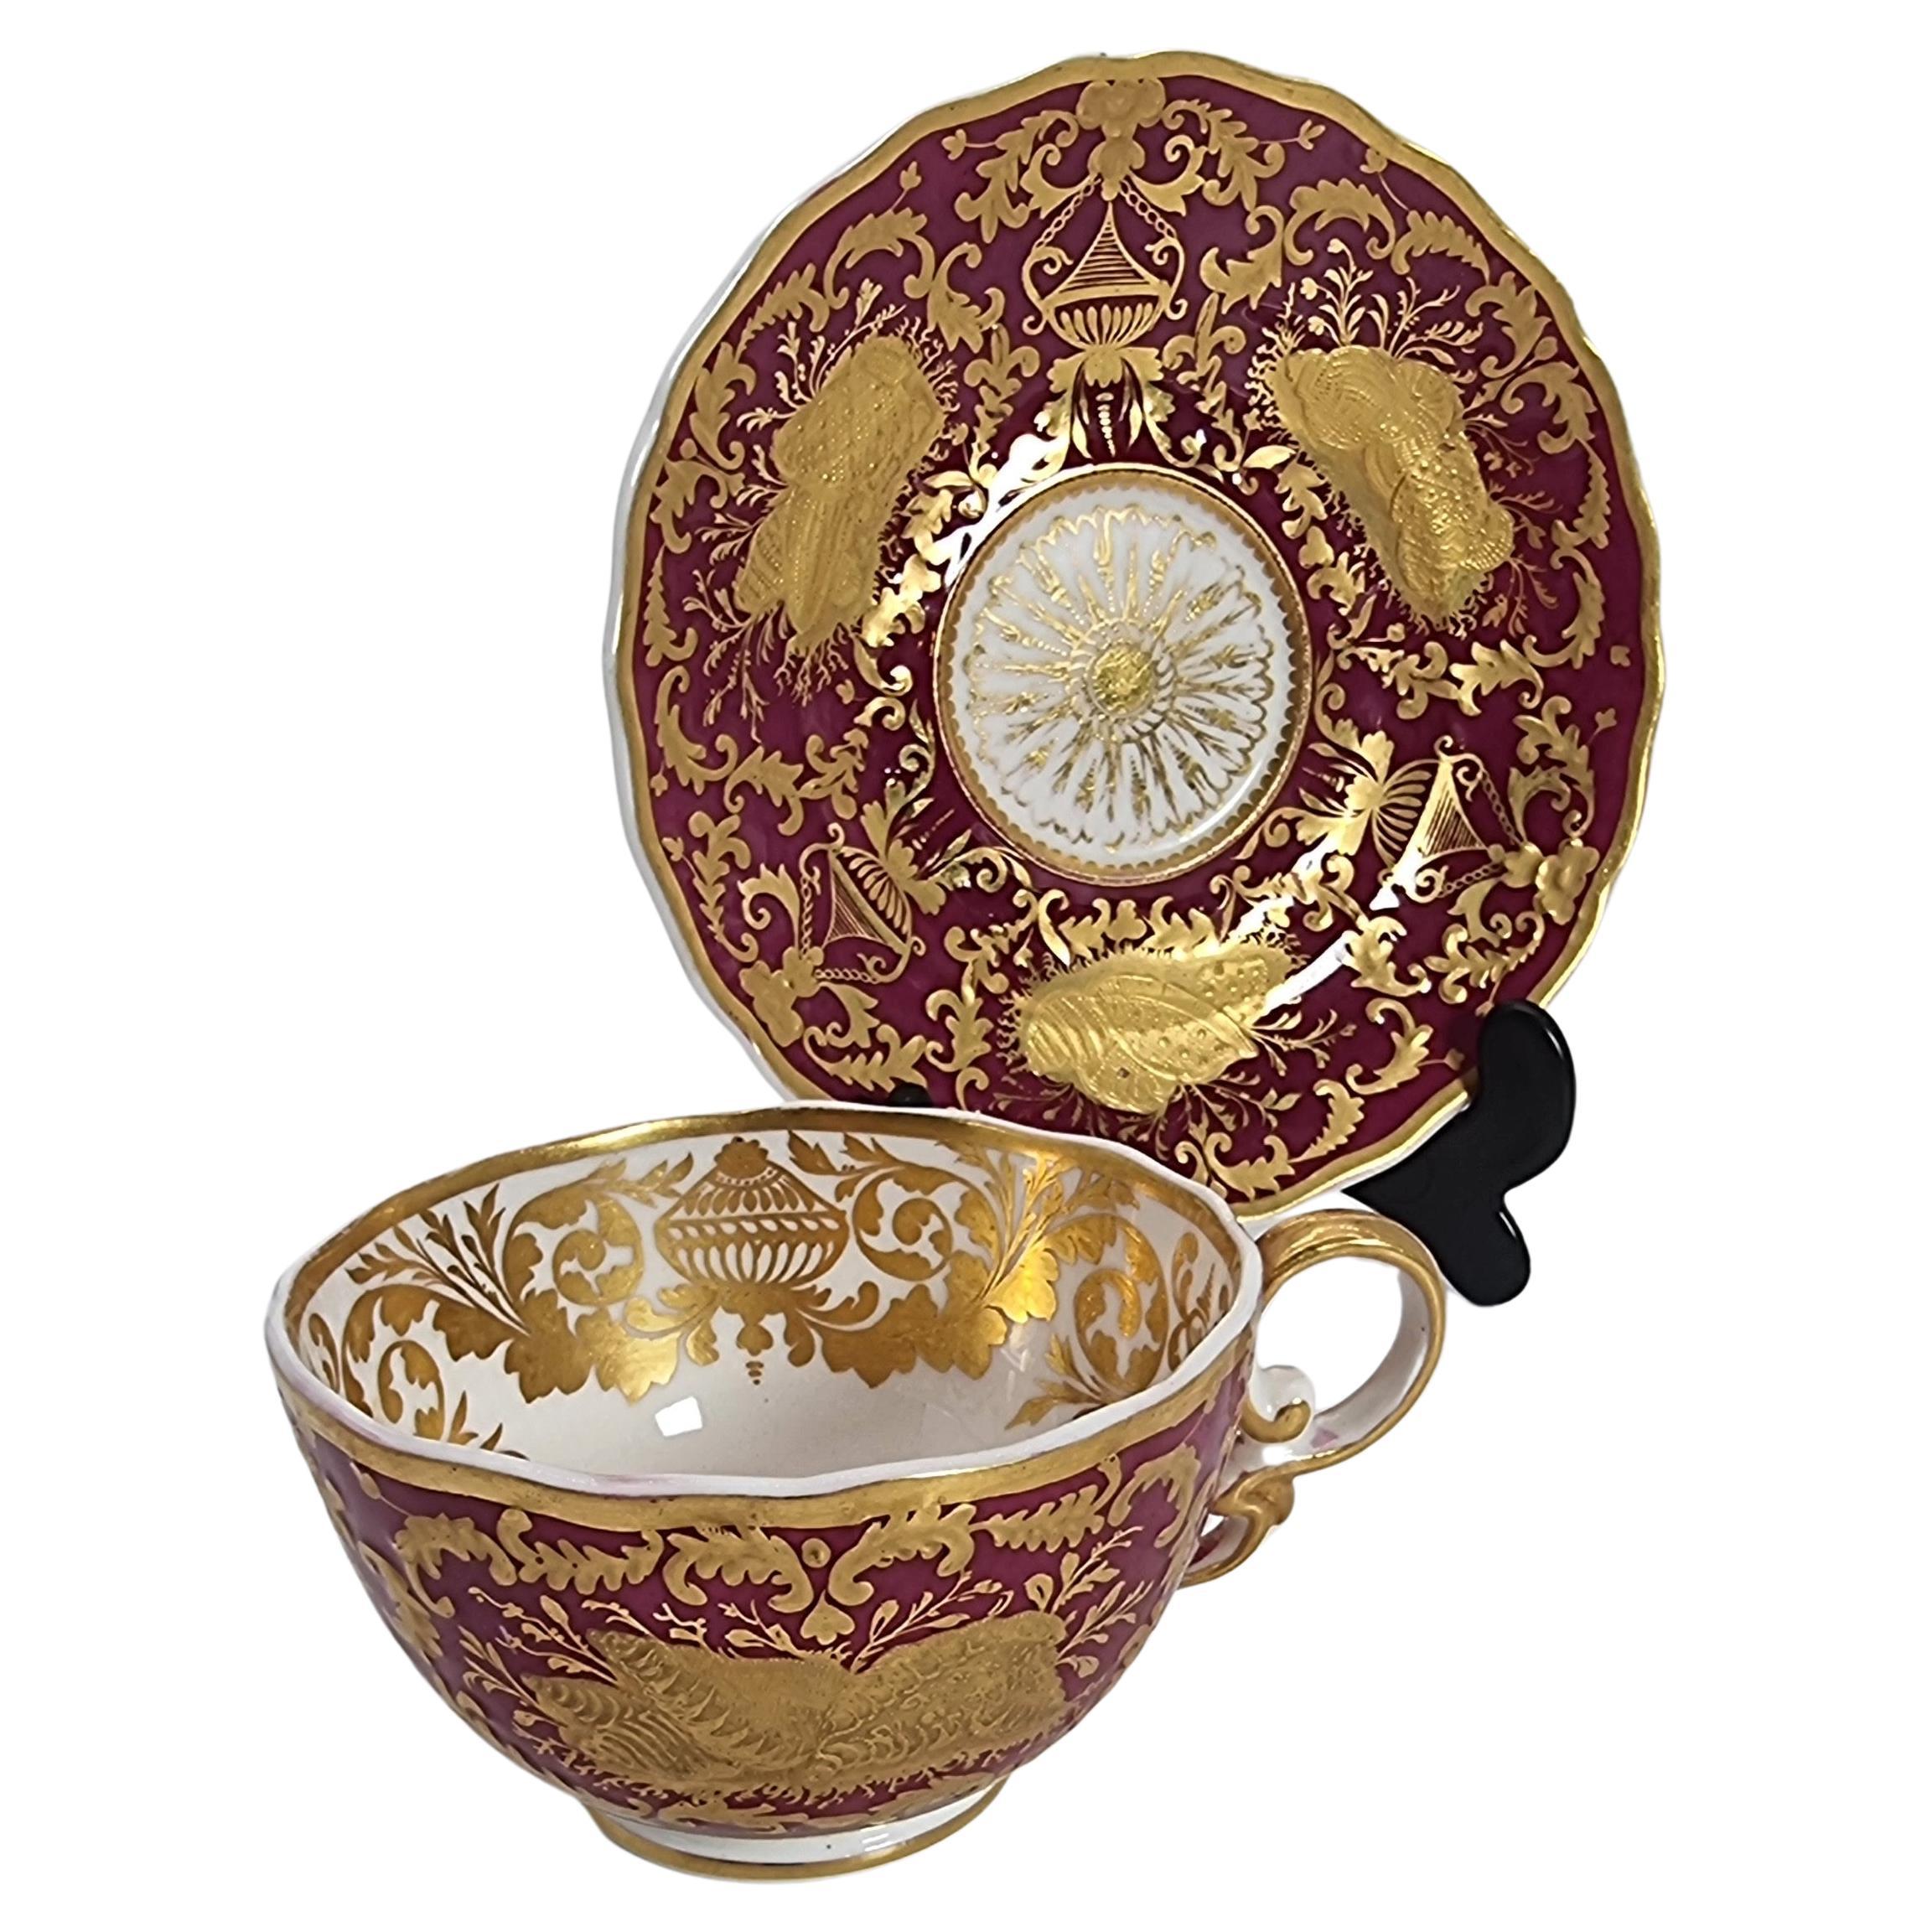 An exquisite and rare early 19t C Spode cabinet cup and saucer circa 1830 For Sale